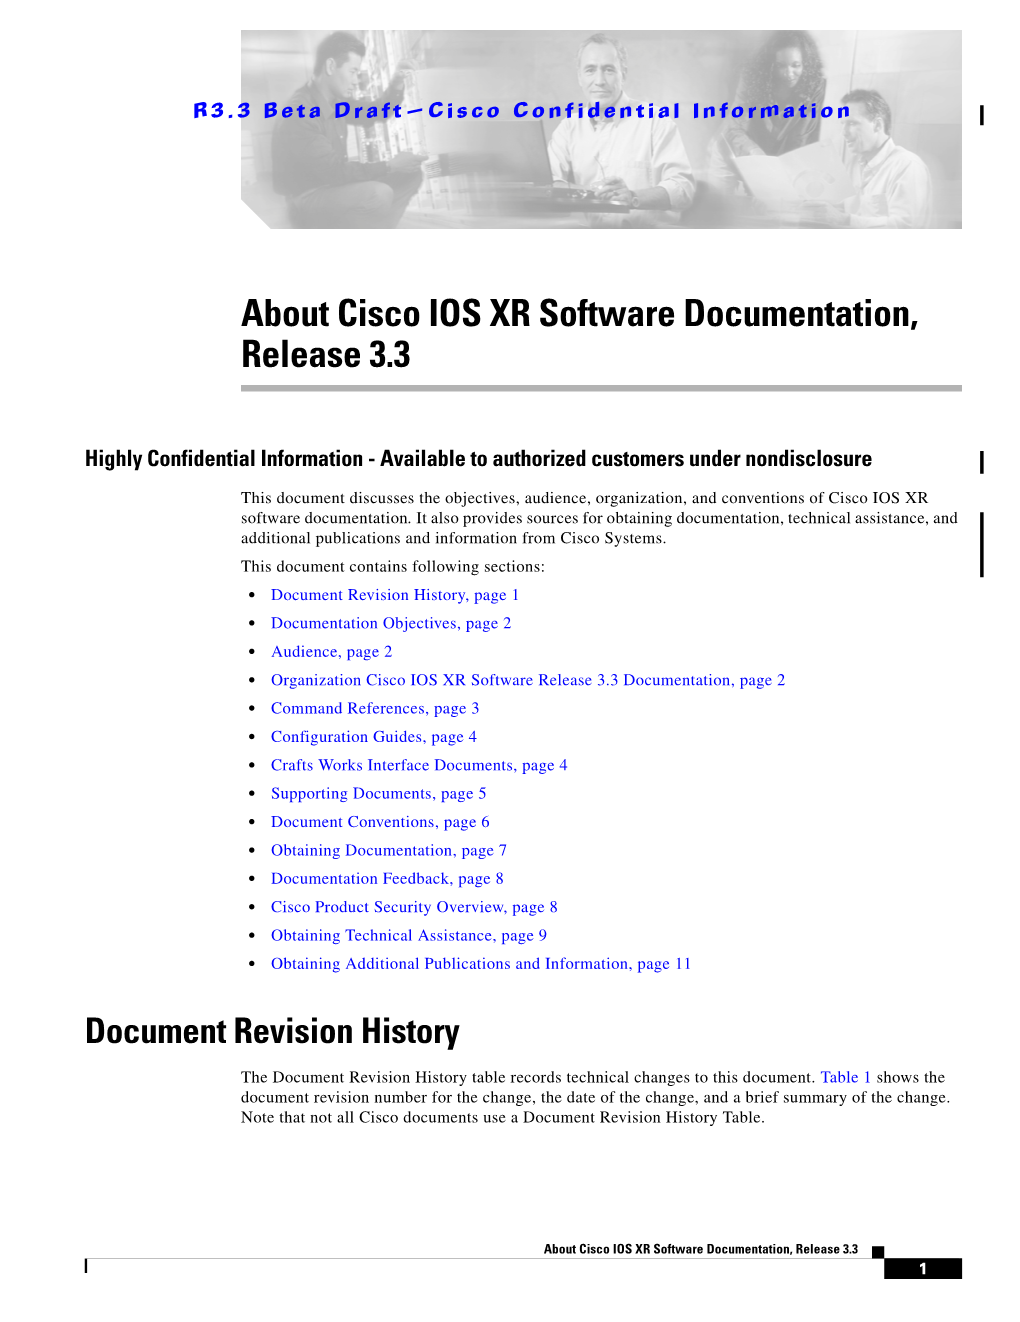 About Cisco IOS XR Software Documentation, Release 3.3